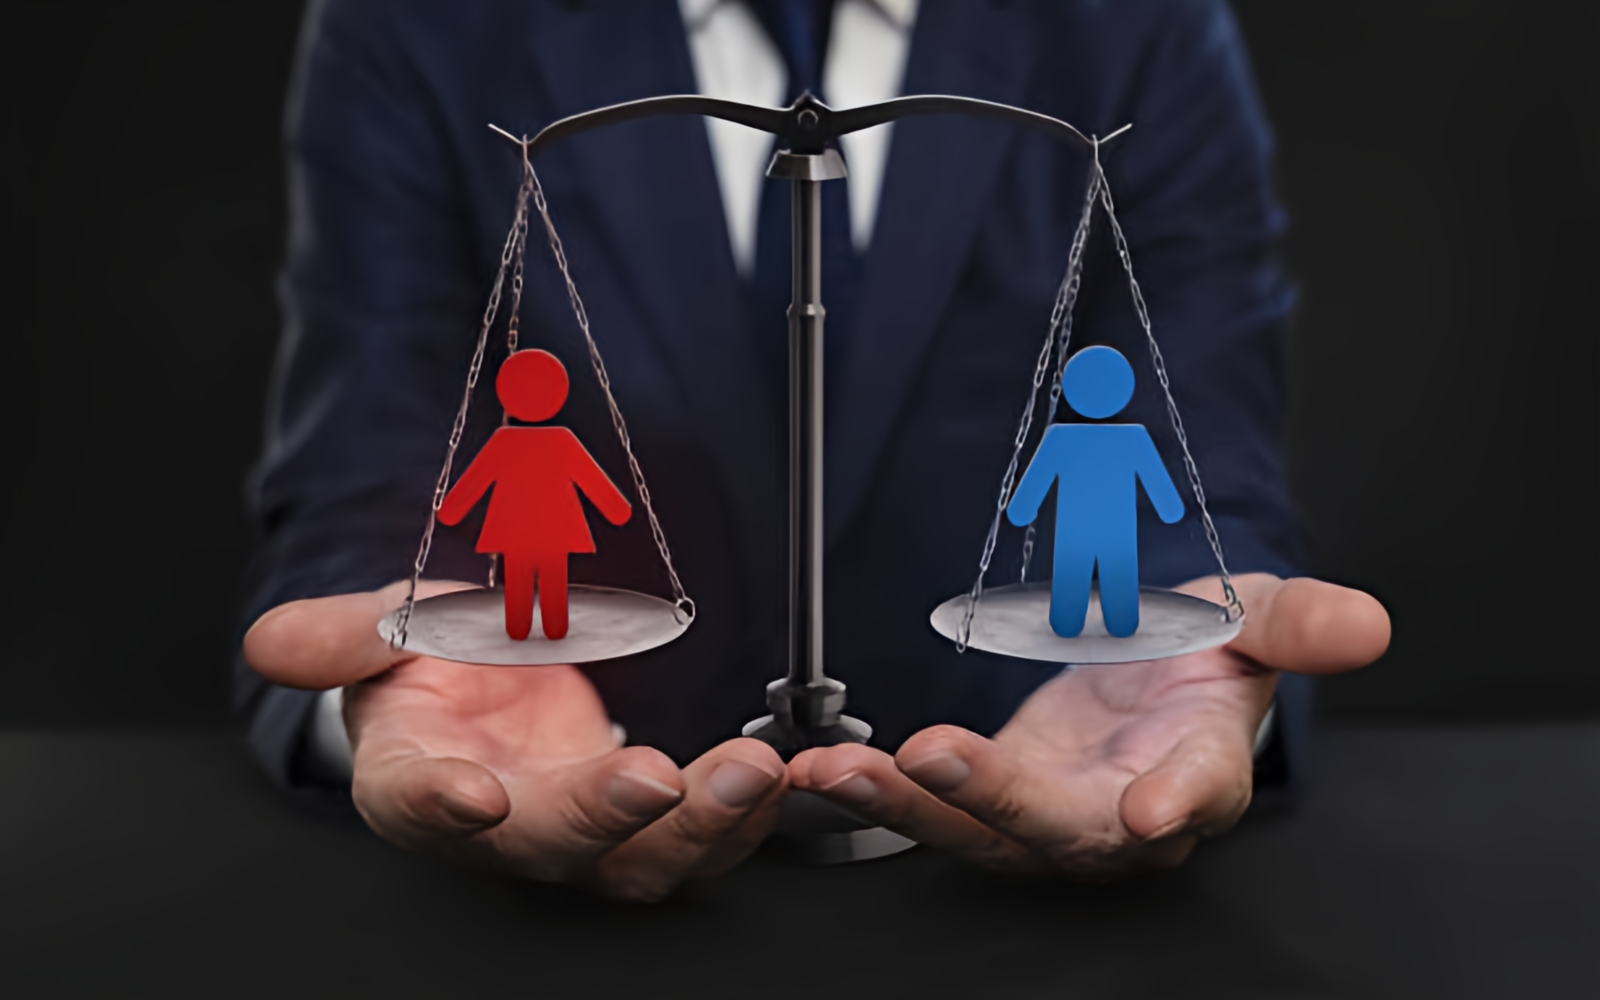 Advancing ESG: Gender Equality, Women’s Empowerment, and Social Justice in Business